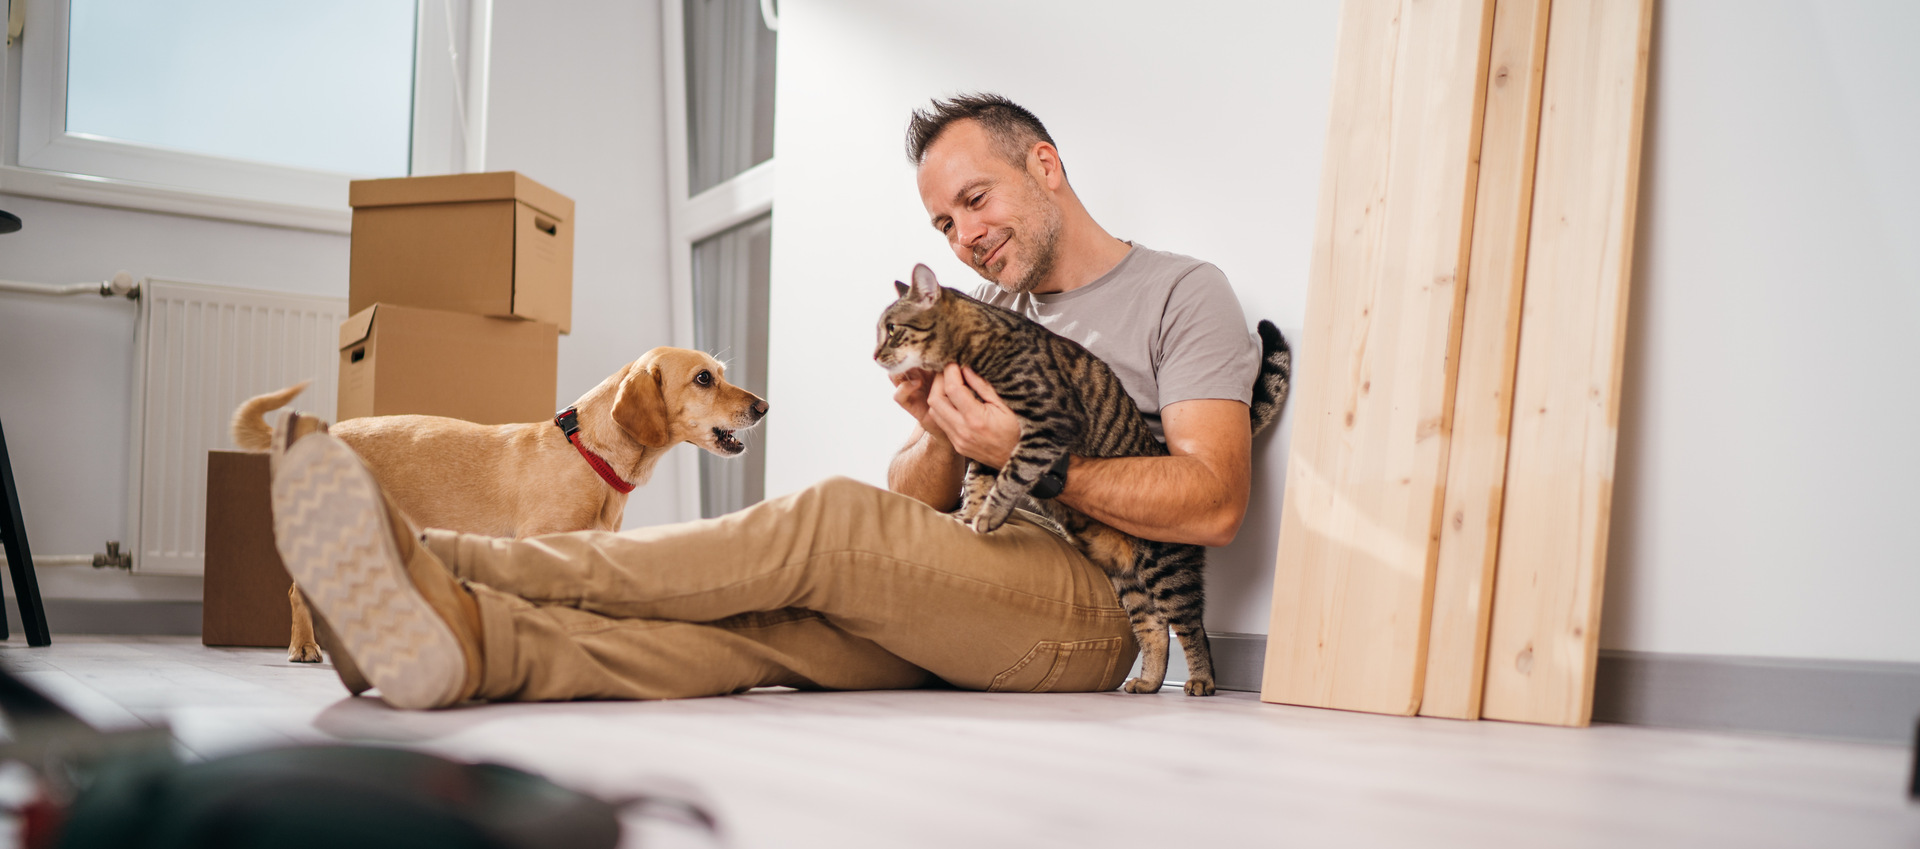 A man with his pets moving into an empty apartment